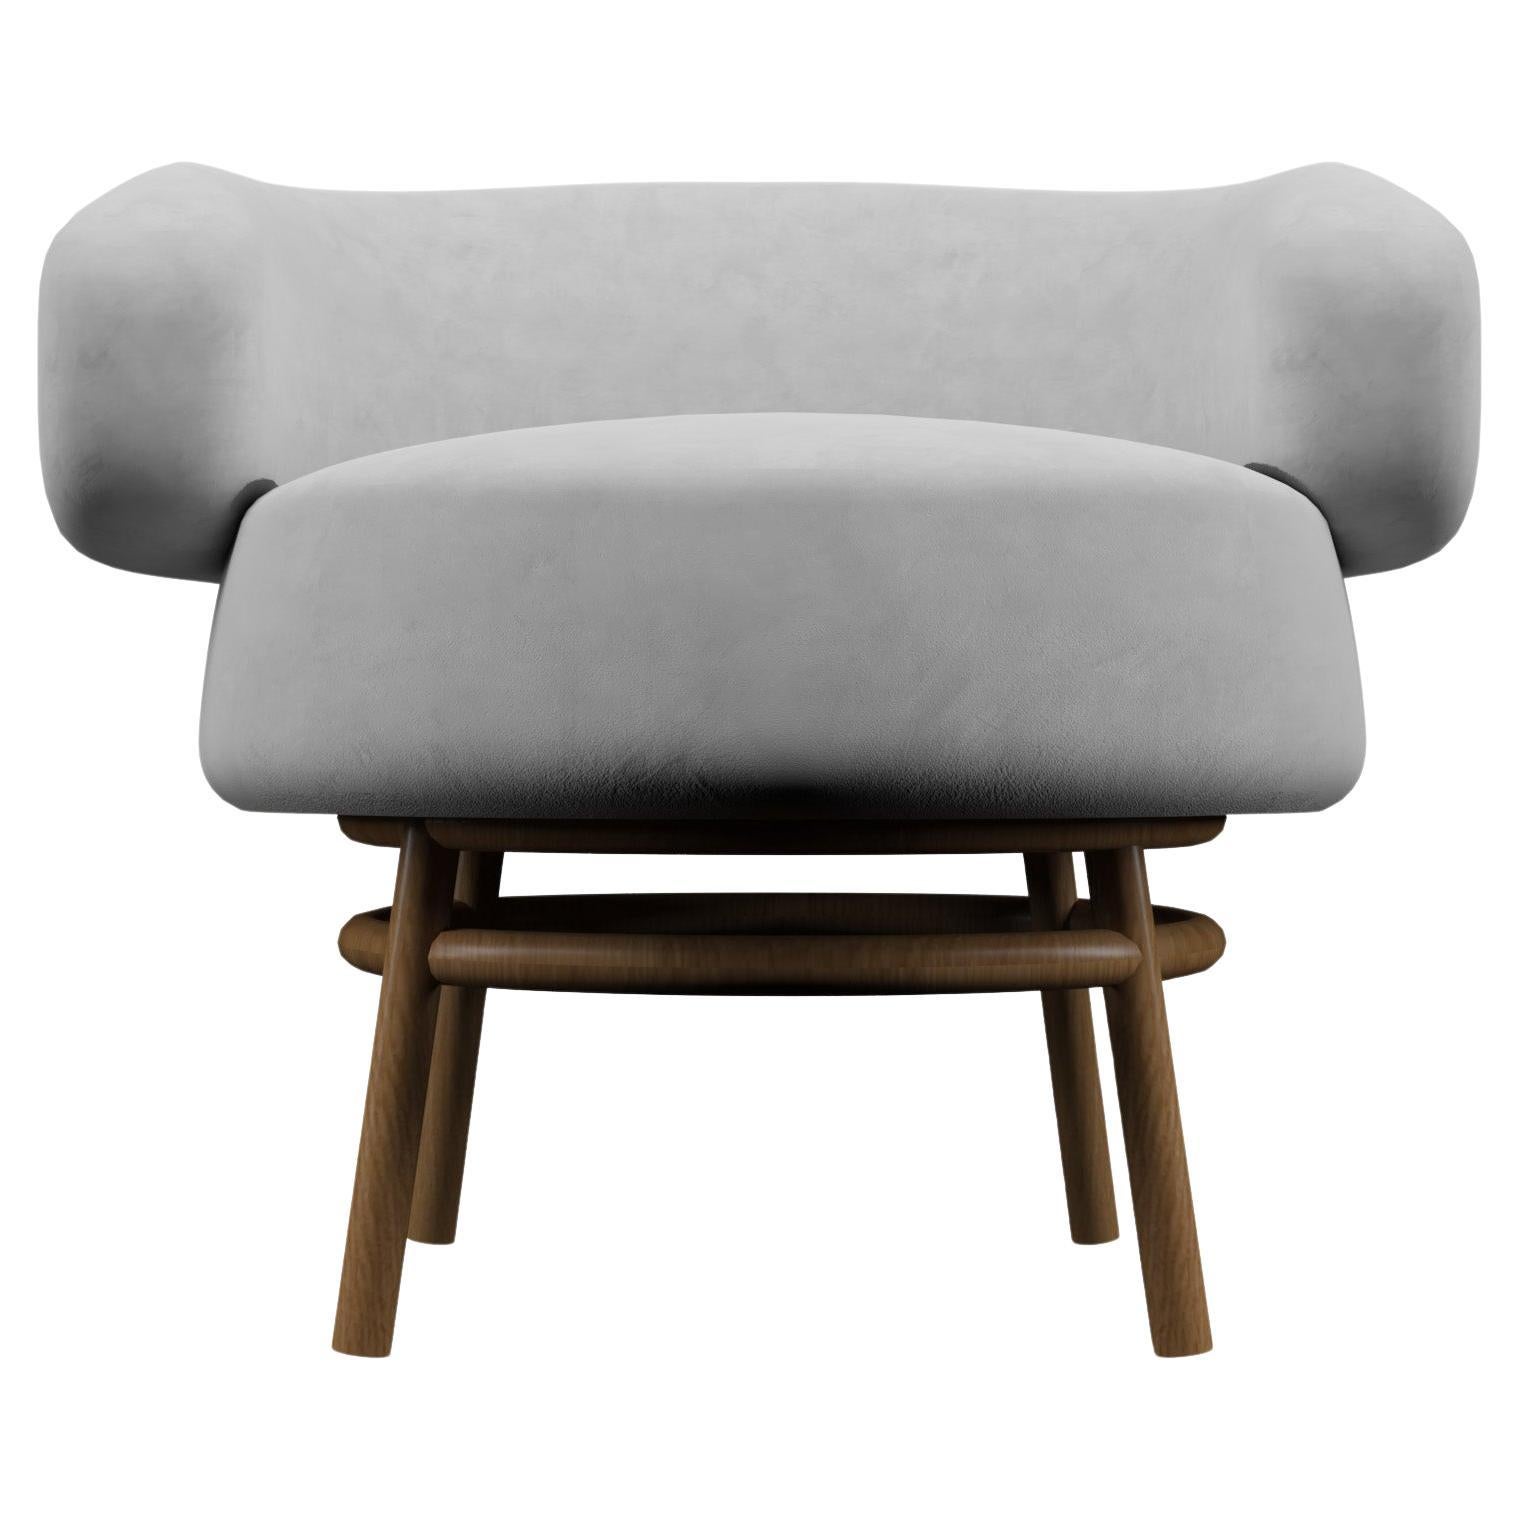 MIAMI Velvet Chair in Grey by Alexandre Ligios, REP by Tuleste Factory For Sale